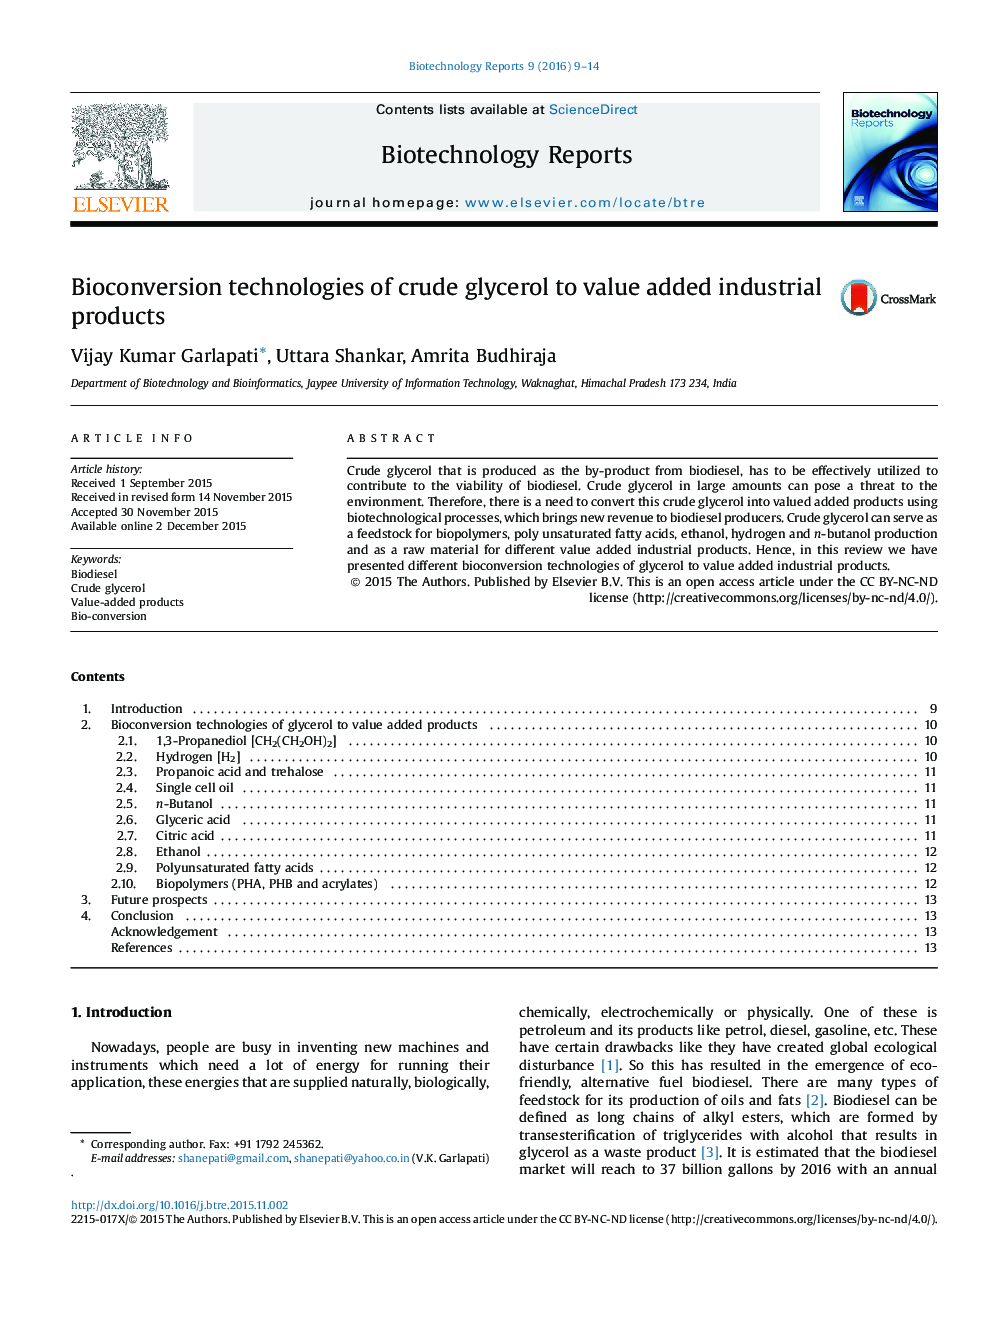 Bioconversion technologies of crude glycerol to value added industrial products